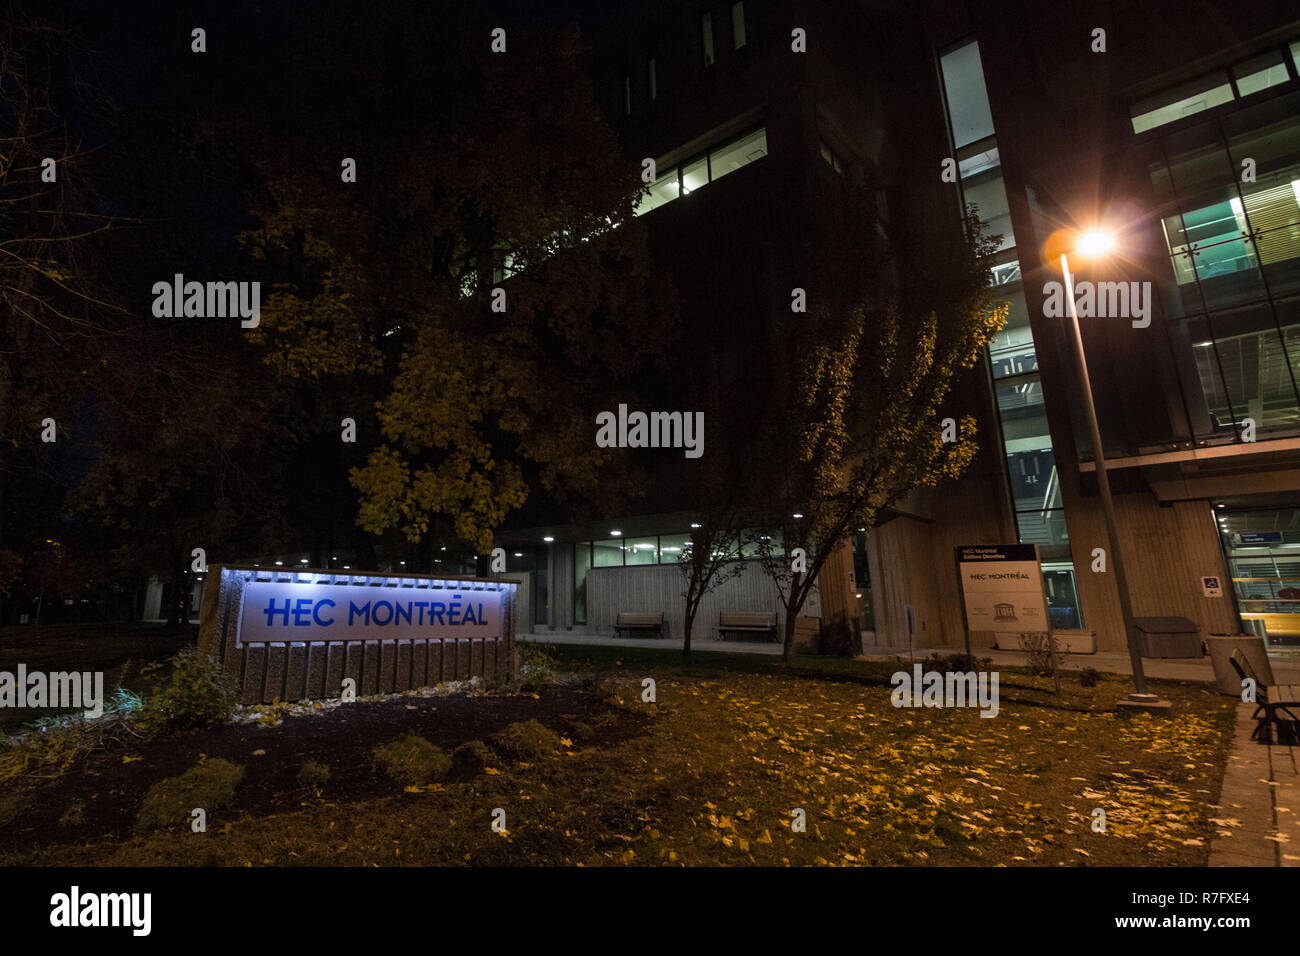 MONTREAL, CANADA - NOVEMBER 5, 2018: HEC Montreal logo taken at night on the entrance of Cote des neiges Campus. Part of the University of Montreal, i Stock Photo